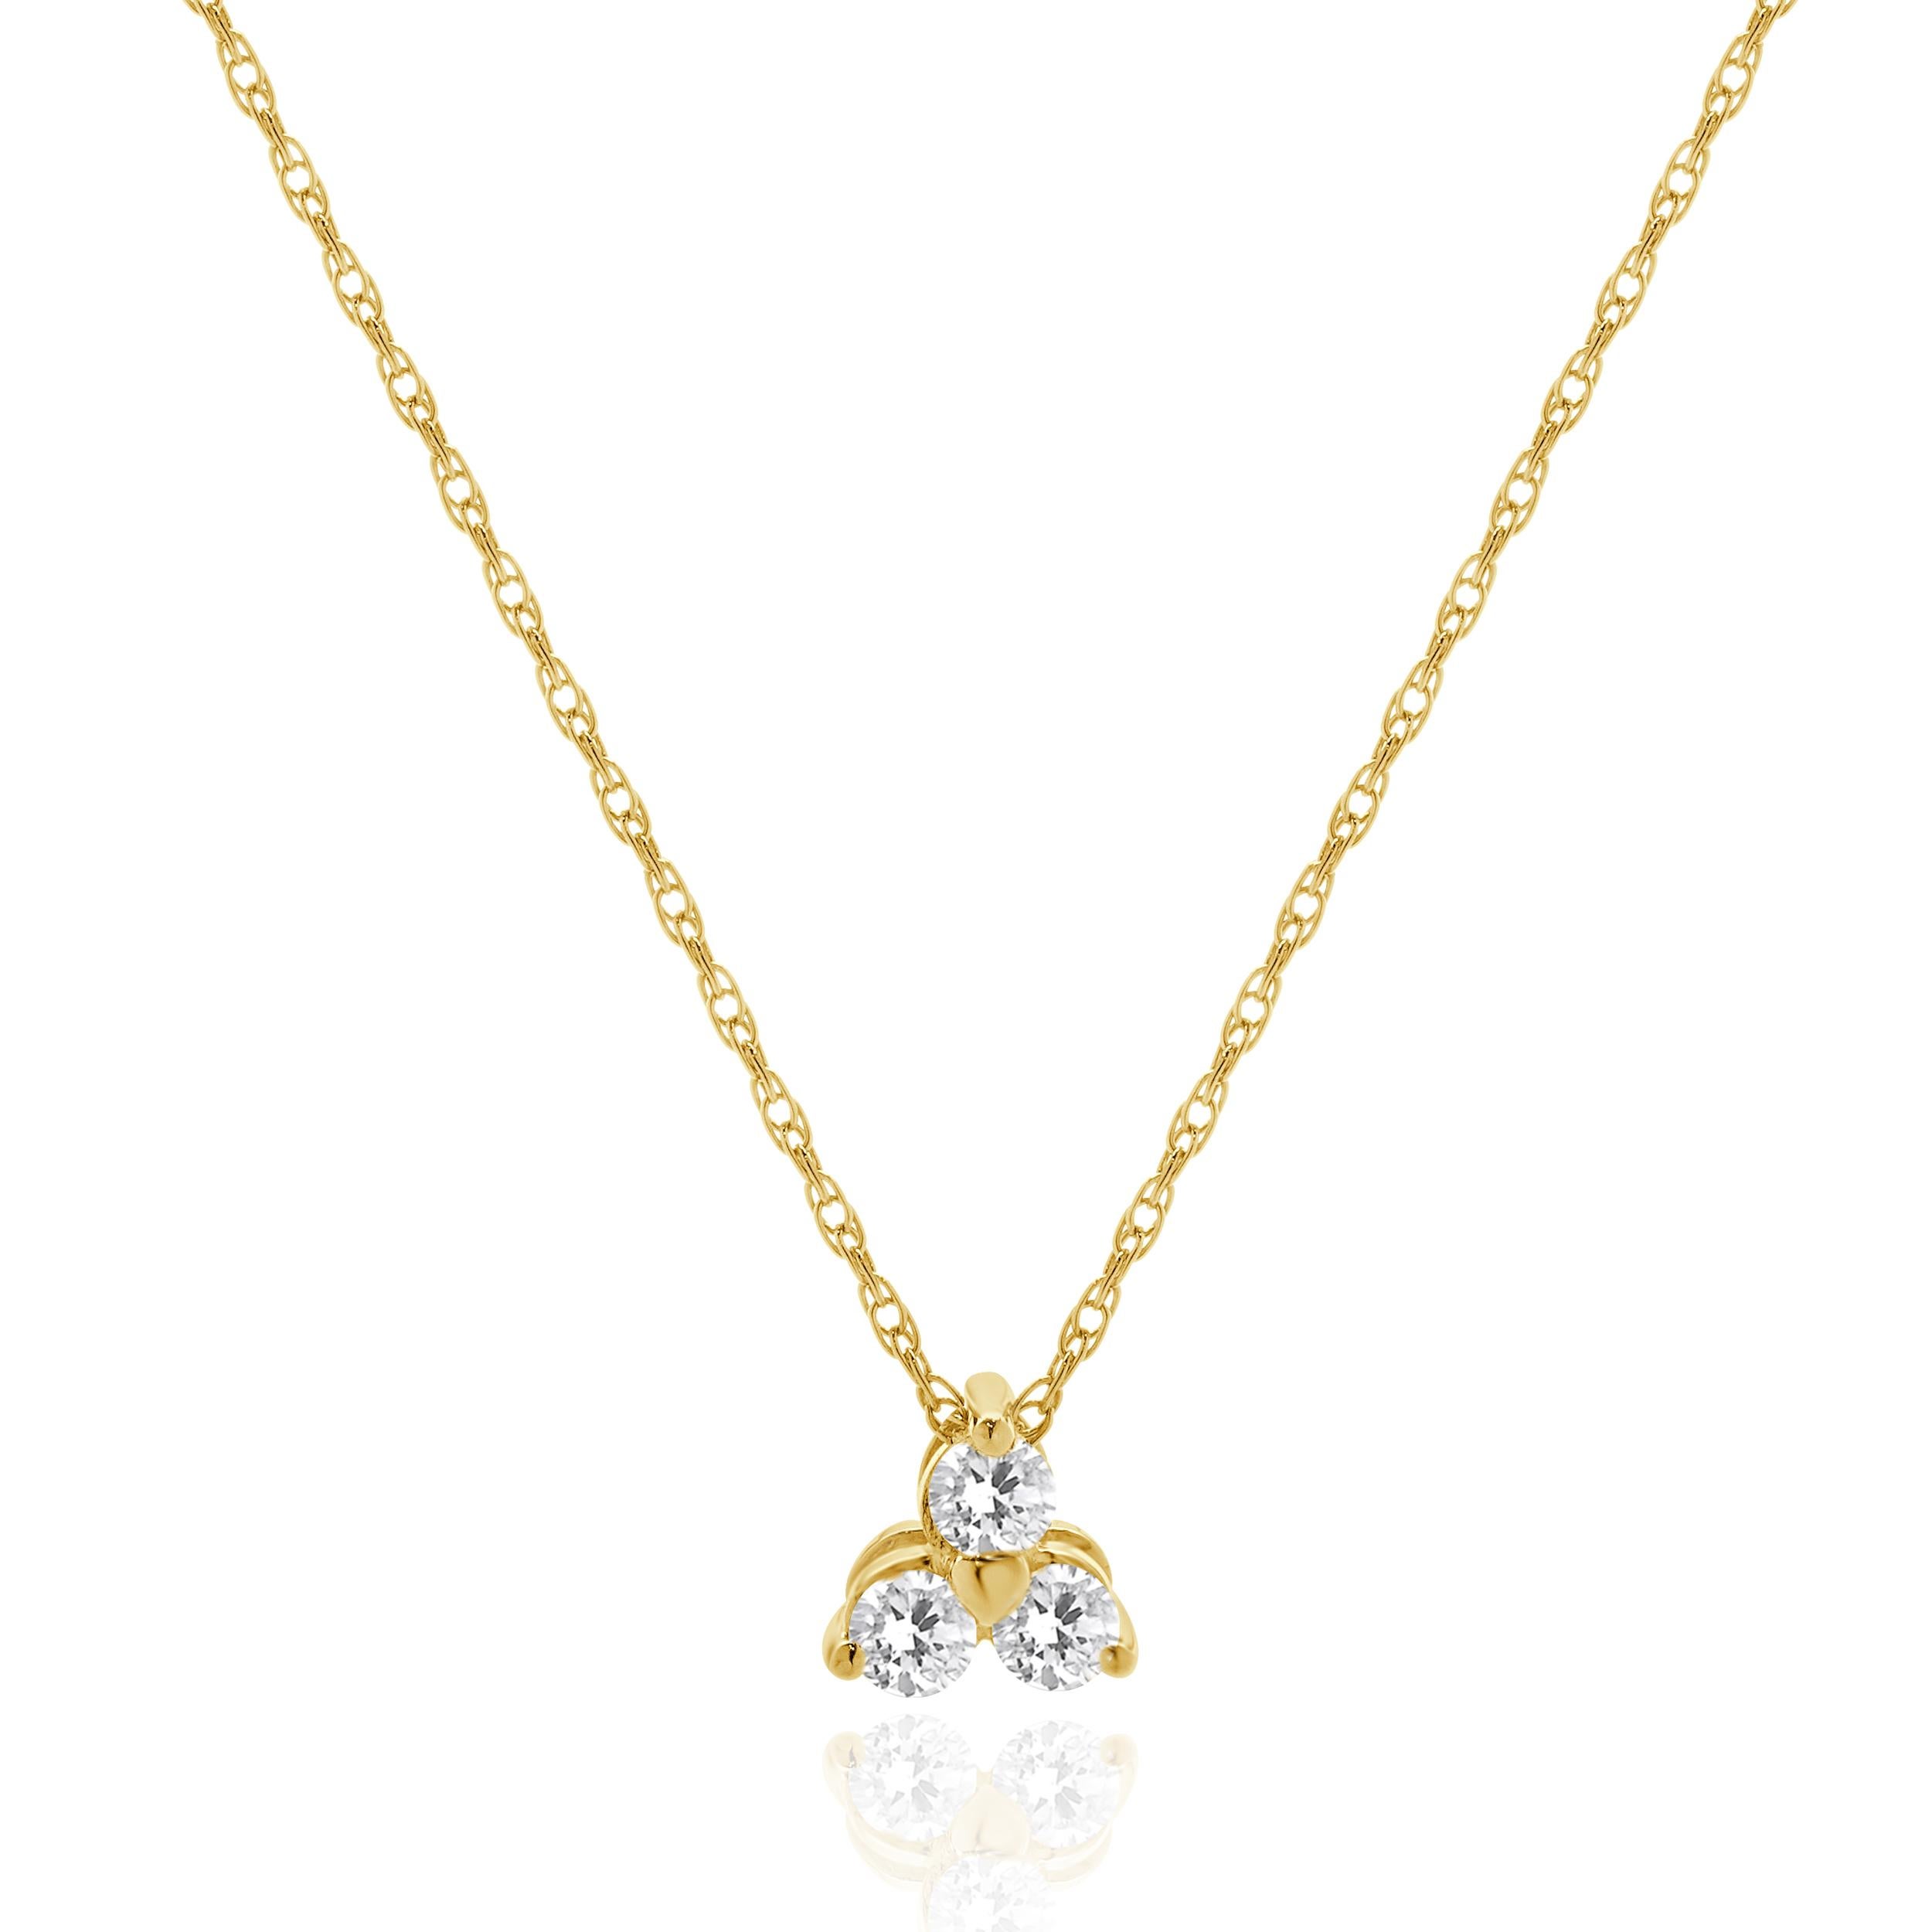 Designer: custom
Material: 14K yellow gold
Diamonds: 3 round brilliant cut = 0.30cttw
Color: G / H 
Clarity: I1
Dimensions: necklace measures 18-inches in length 
Weight: 1.62 grams
